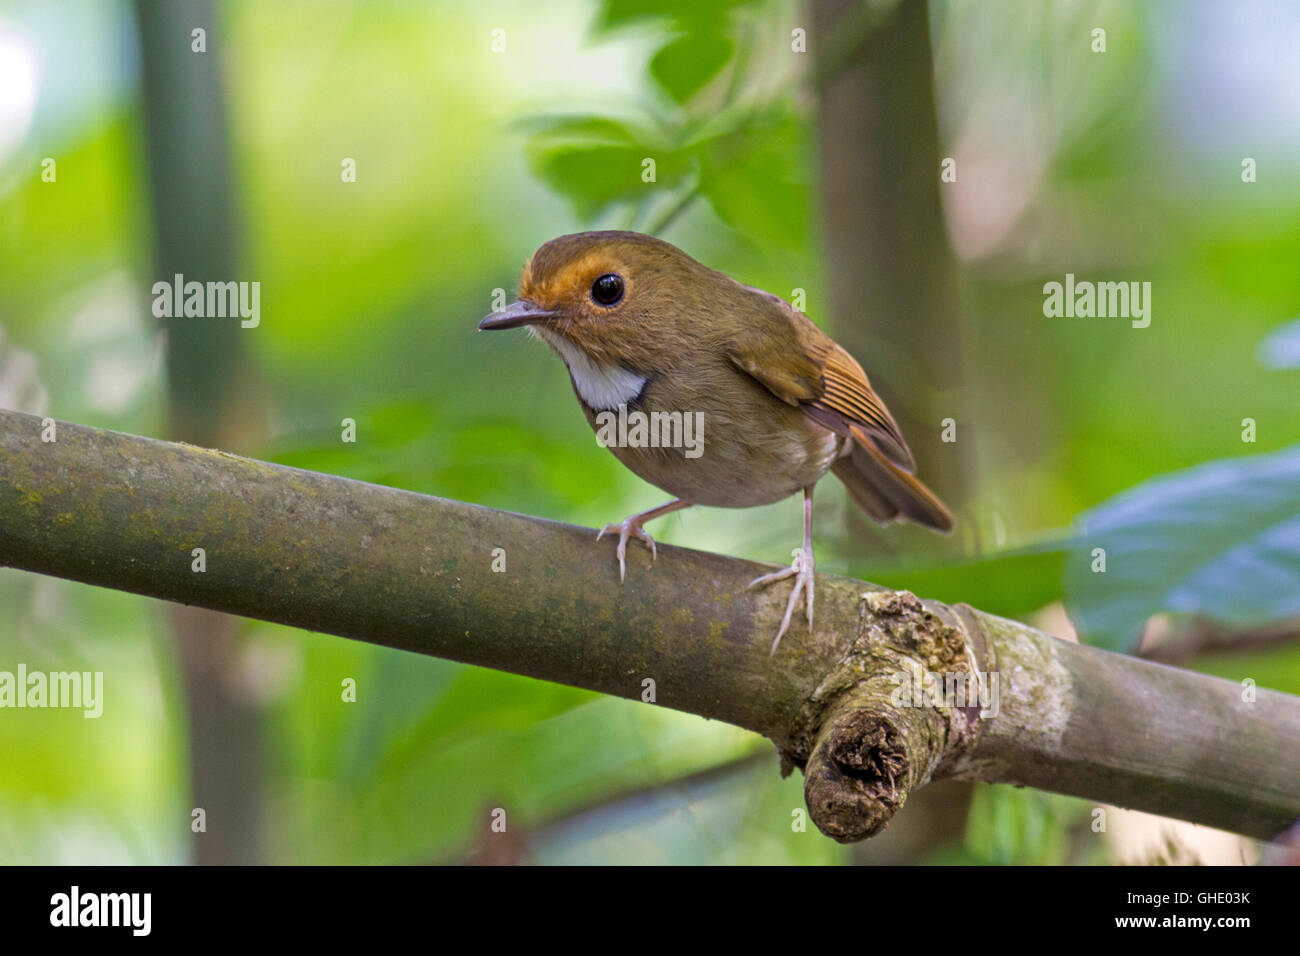 A Rufous-browed Flycatcher (Anthipes solitaris submoniliger) perched on a bamboo branch in the Thai forest Stock Photo